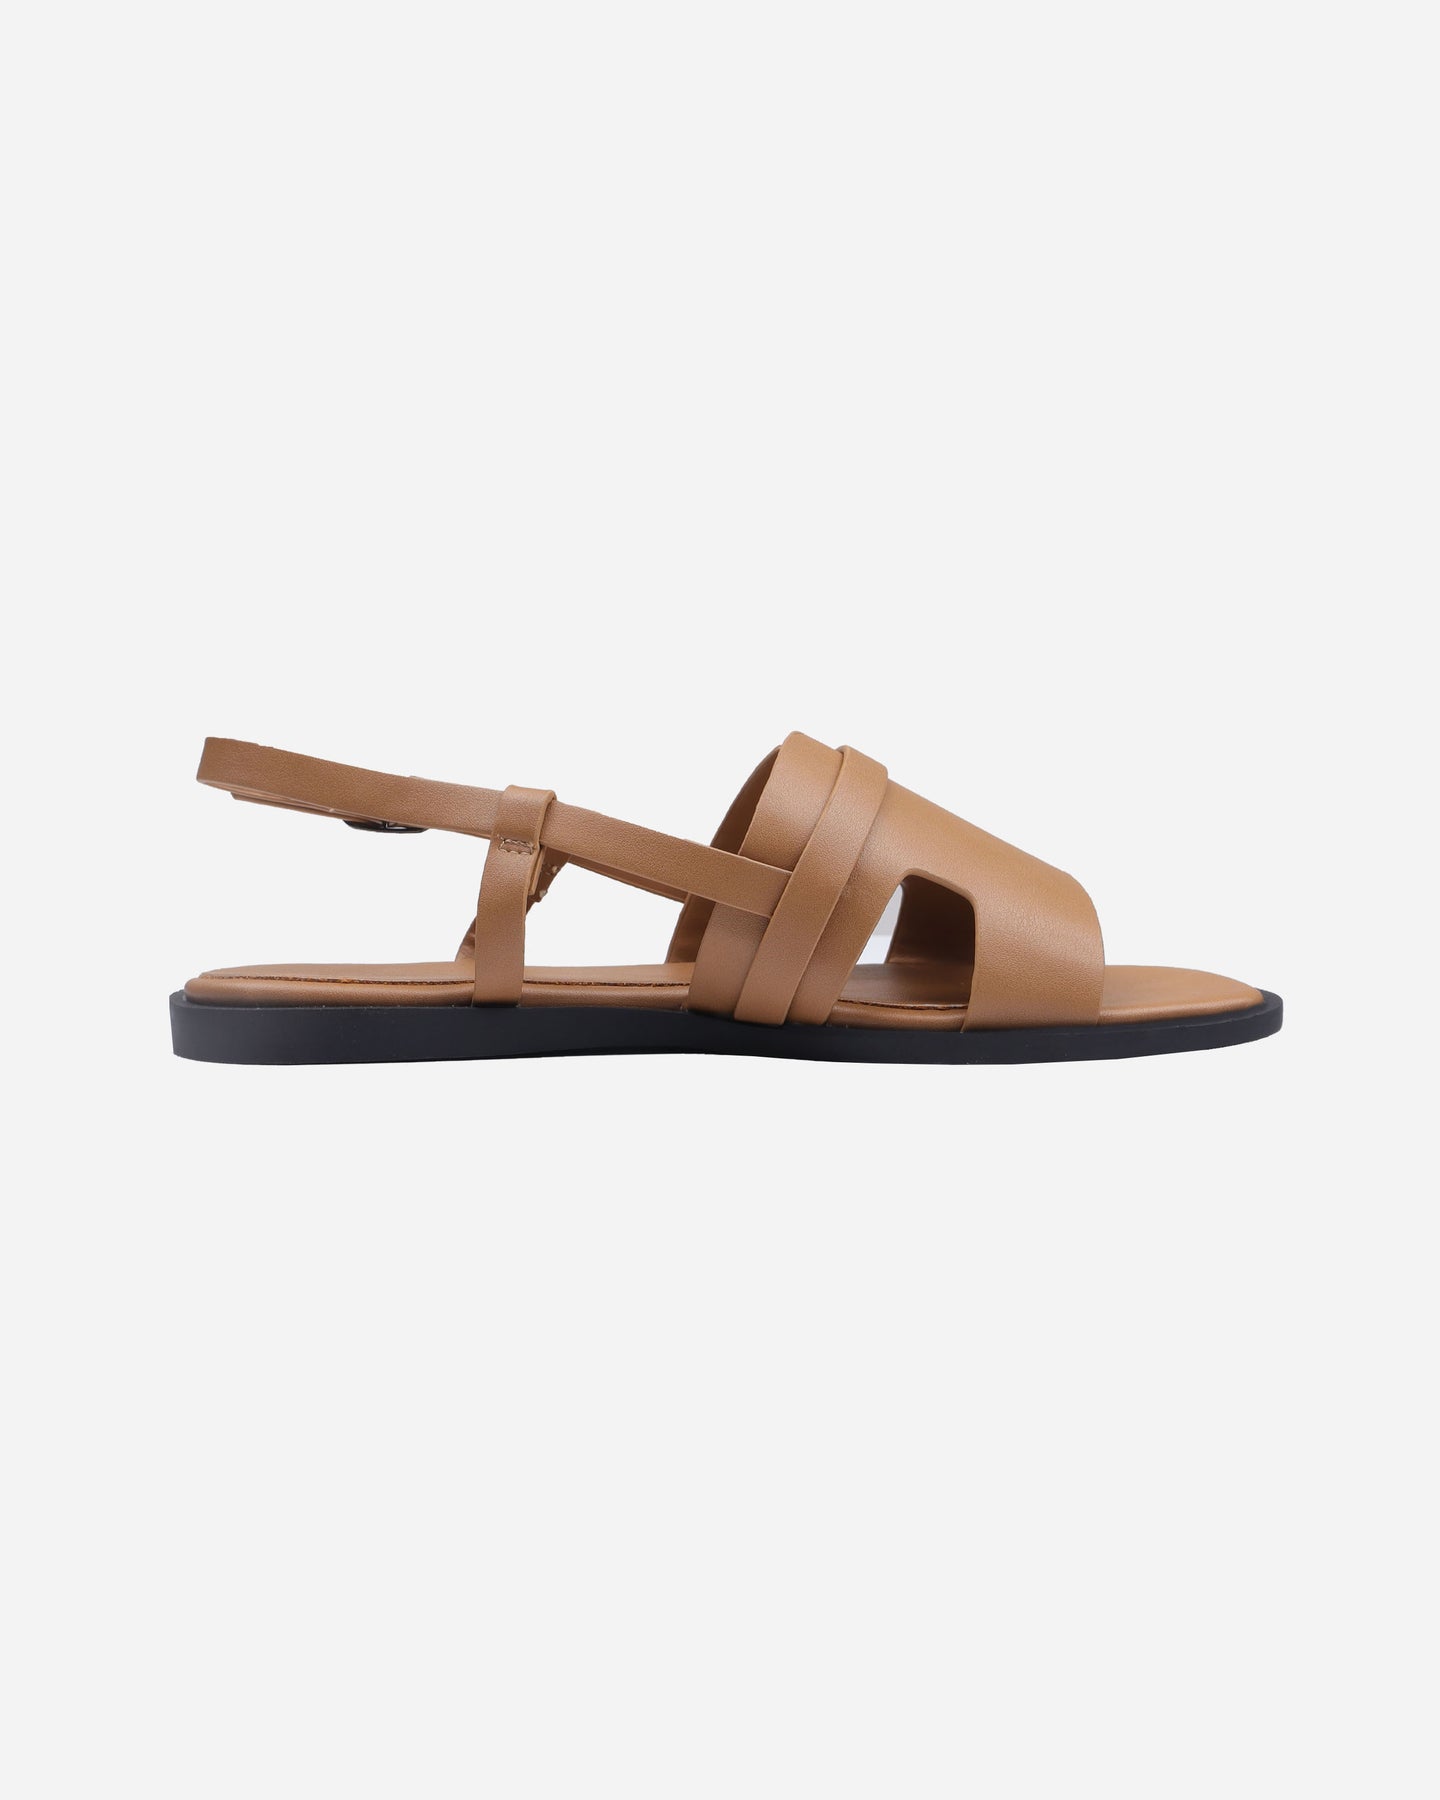 1311 SANDALS IN BROWN